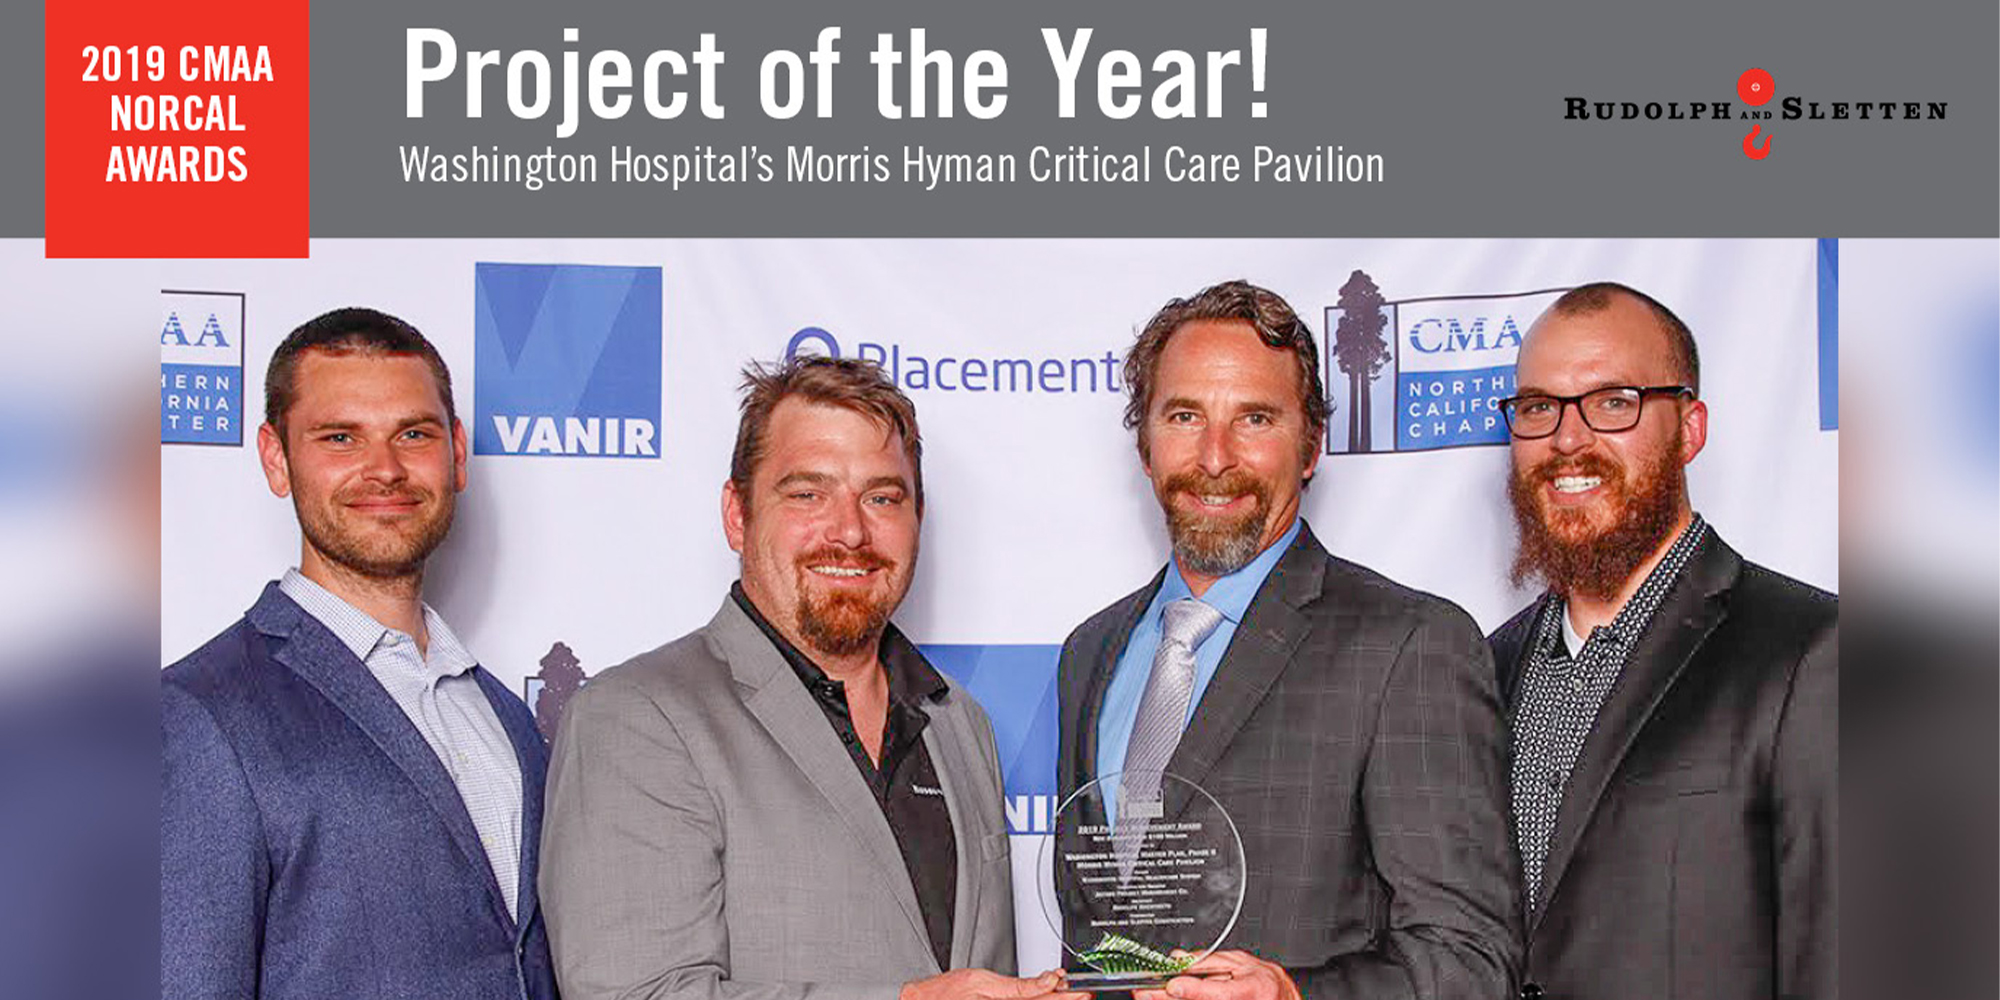 Northern California Project of the Year is Honored at CMAA Awards